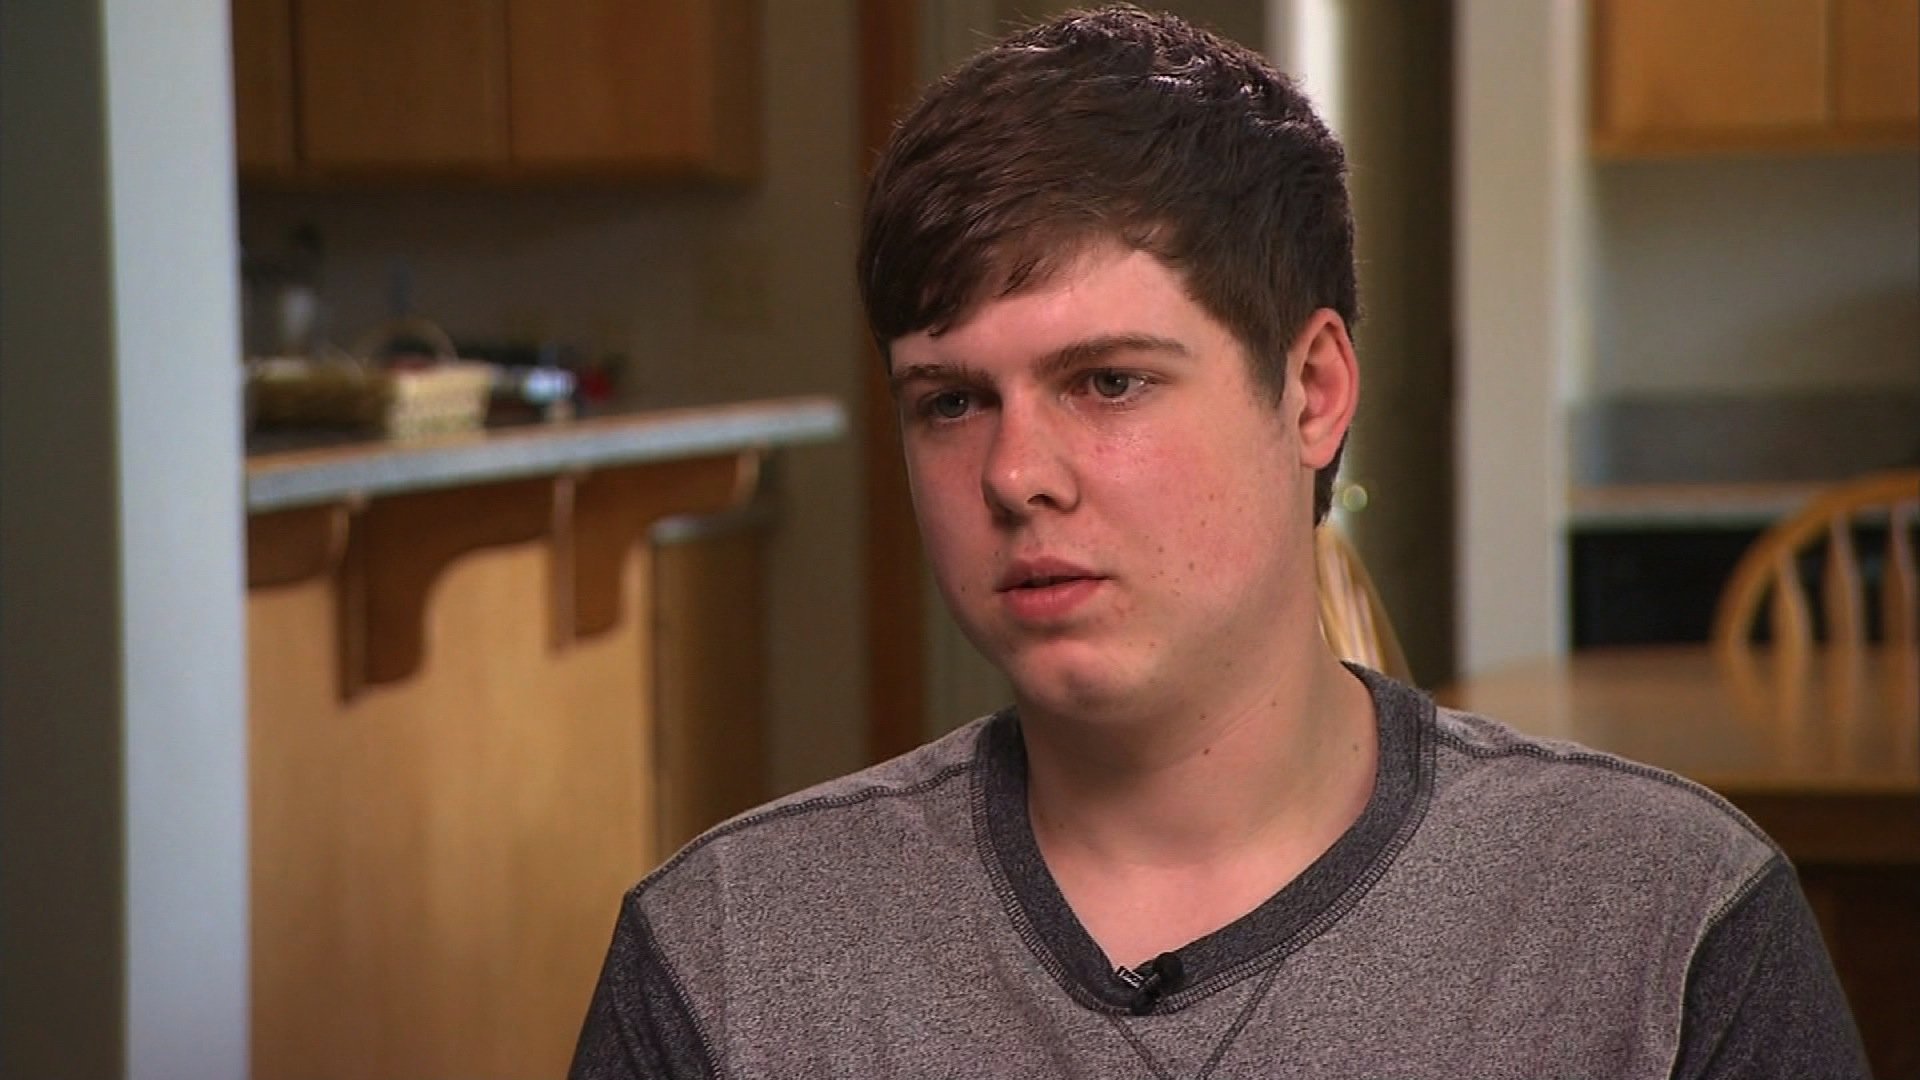 Zach Anderson, 19, met a girl on the Internet and had sex with her. The girl told Zach she was 17, but she was really just 14. Now, Zach has been placed on the sex offender registry for the next 25 years and can't live at home with his 15-year-old brother.